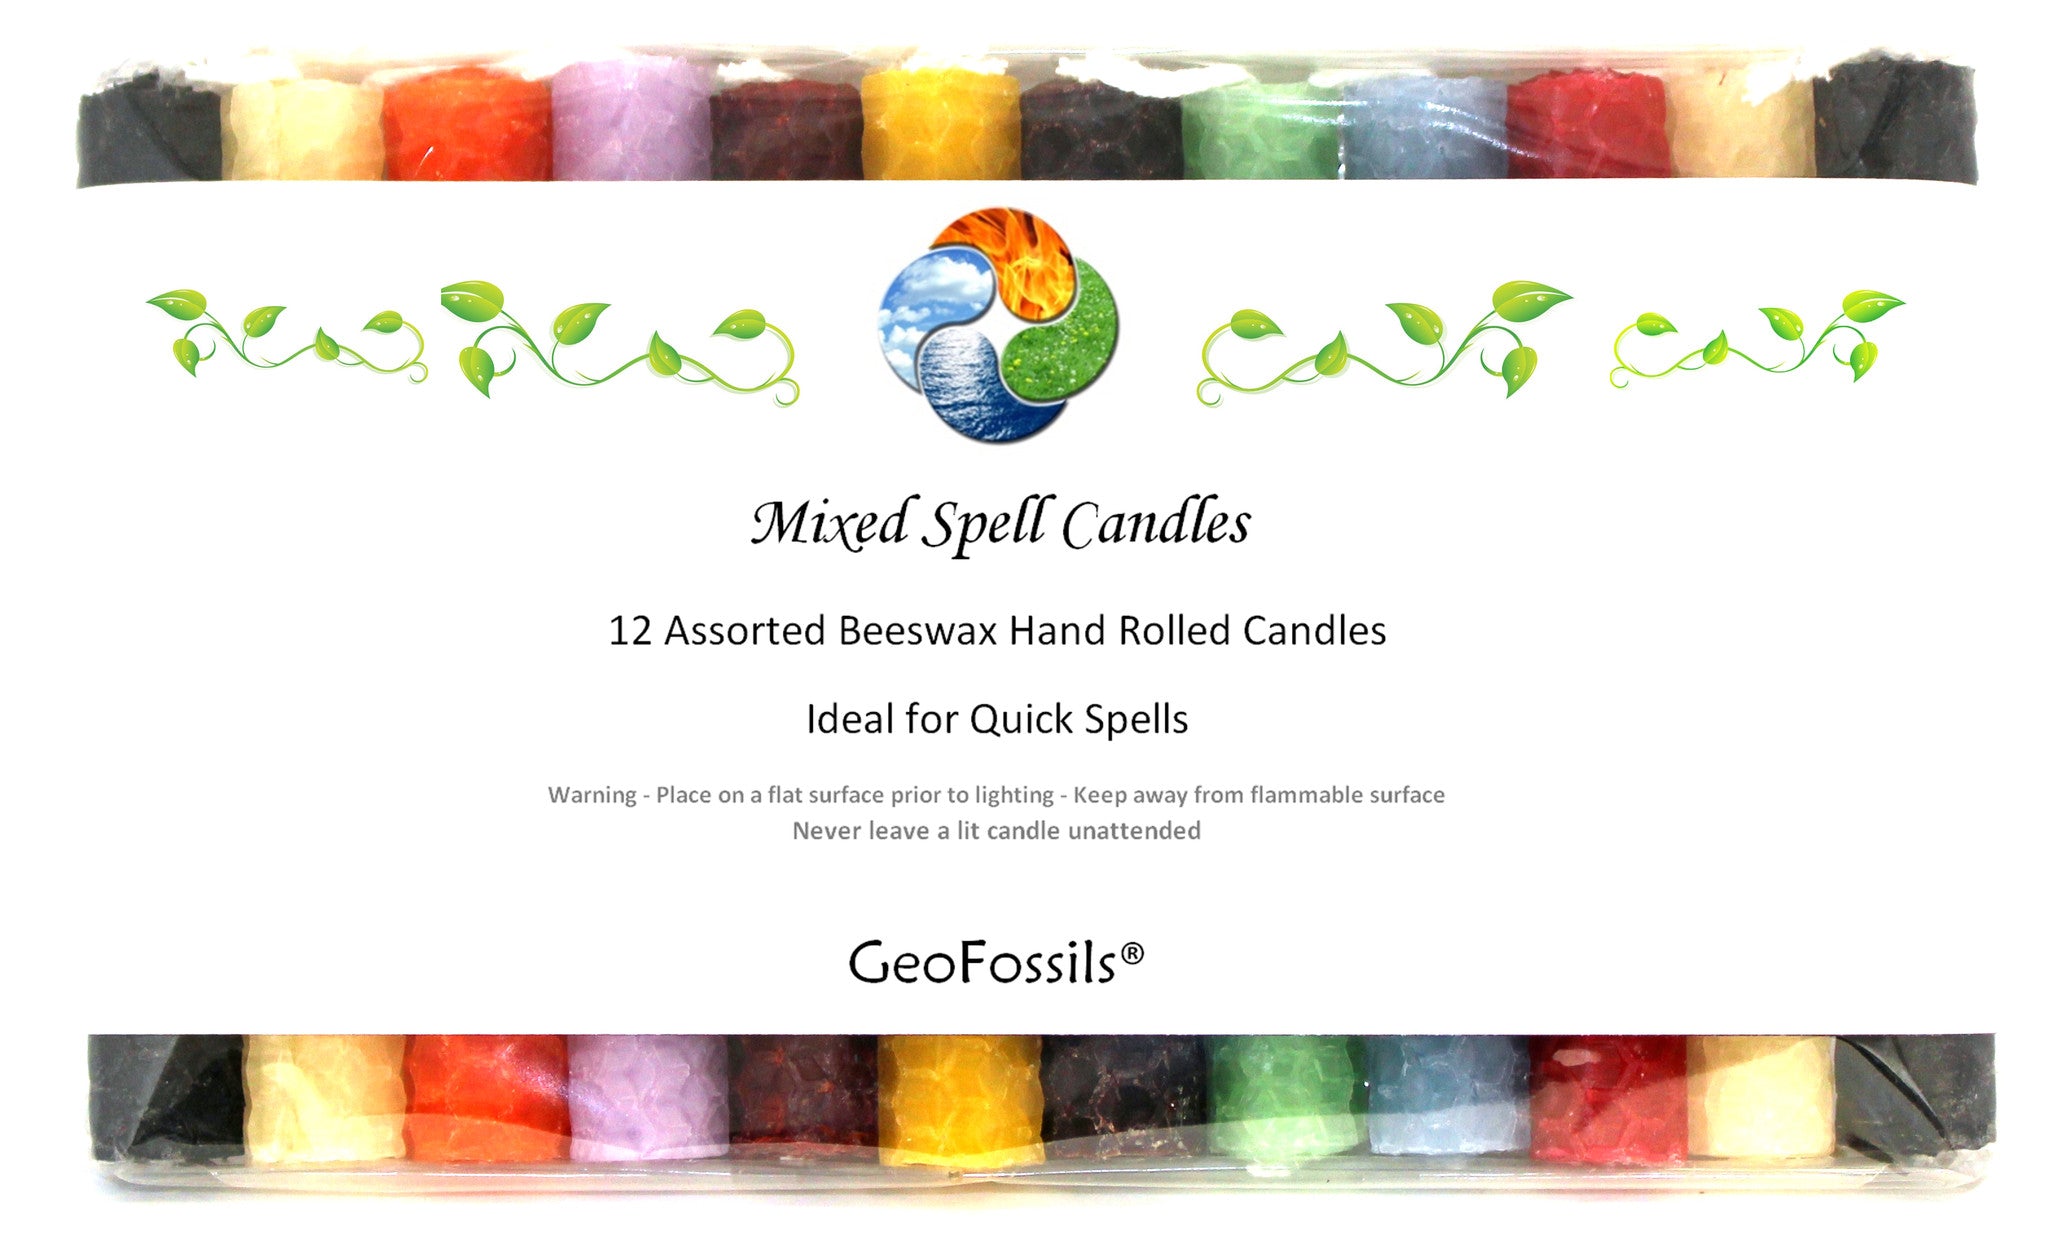 12 Assorted Beeswax Hand Rolled Candles that are black, orange, purple, burgundy, yellow, green, blue and red